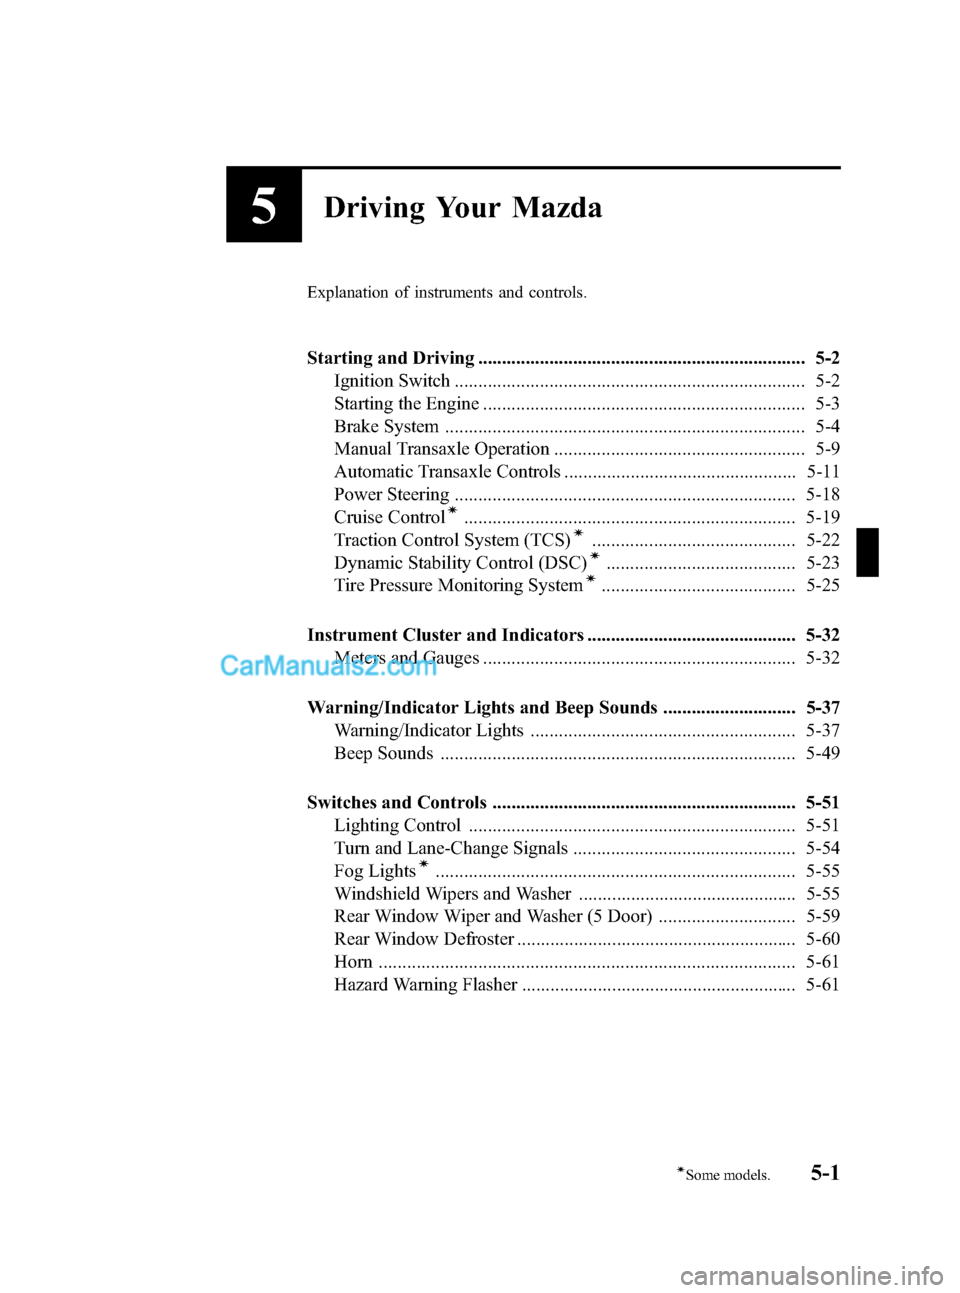 MAZDA MODEL MAZDASPEED 3 2007  Owners Manual (in English) Black plate (123,1)
5Driving Your Mazda
Explanation of instruments and controls.
Starting and Driving ..................................................................... 5-2
Ignition Switch ........